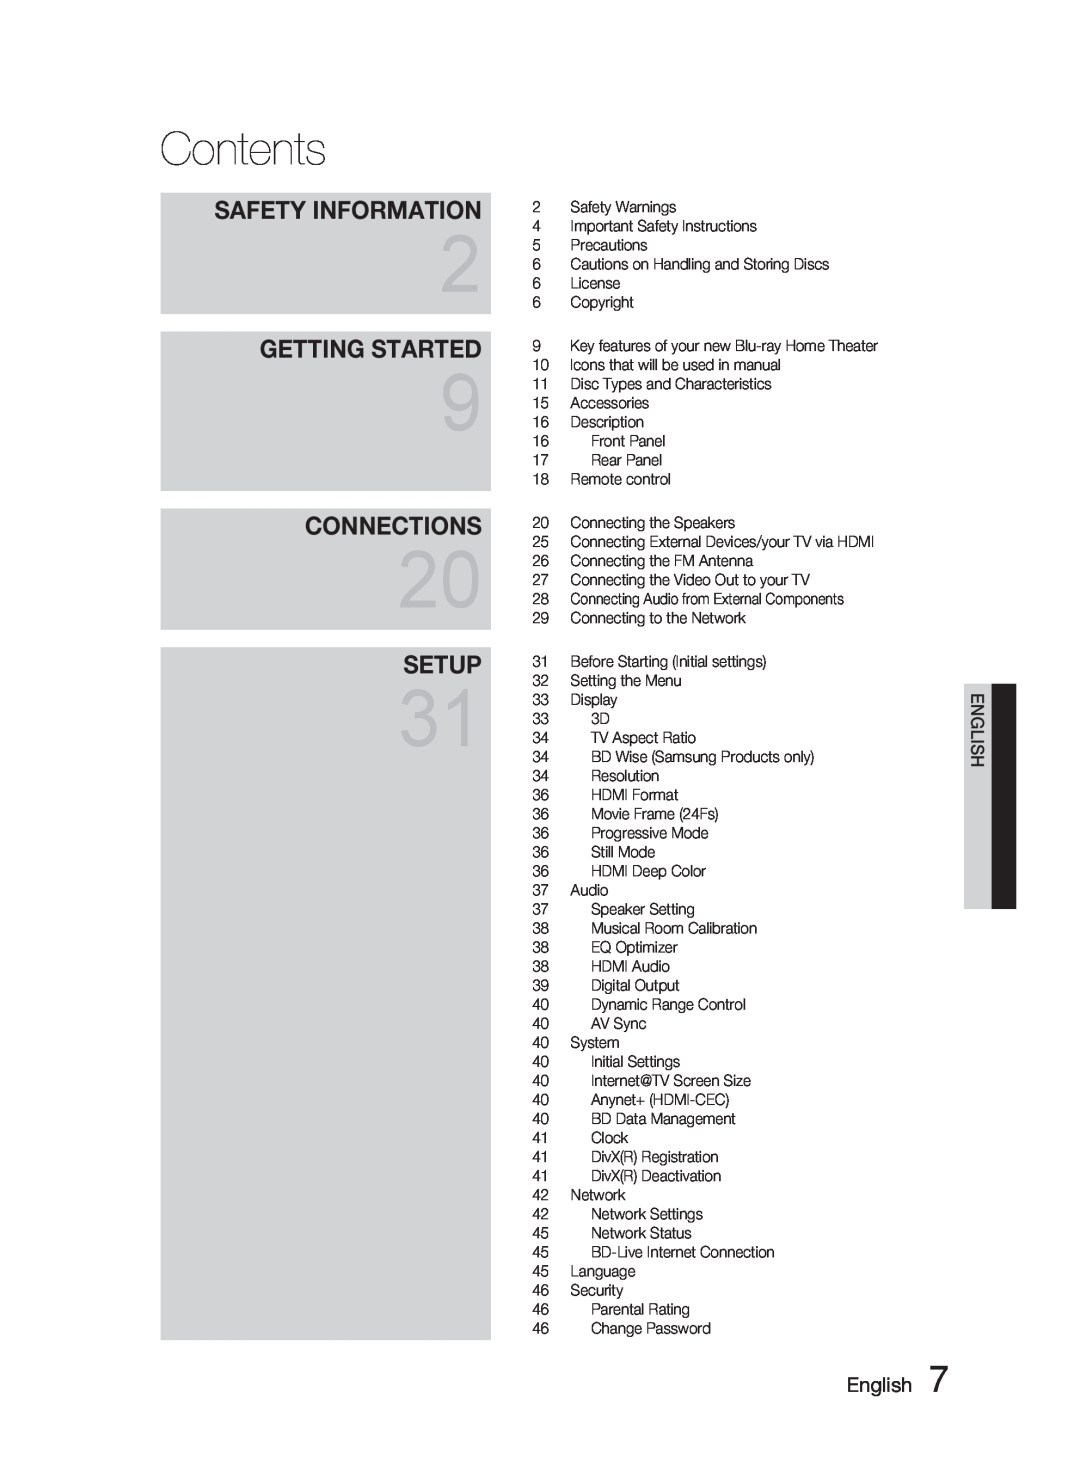 Samsung AH68-02279Y user manual Contents, Getting Started, Connections, Setup, Safety Information, English 